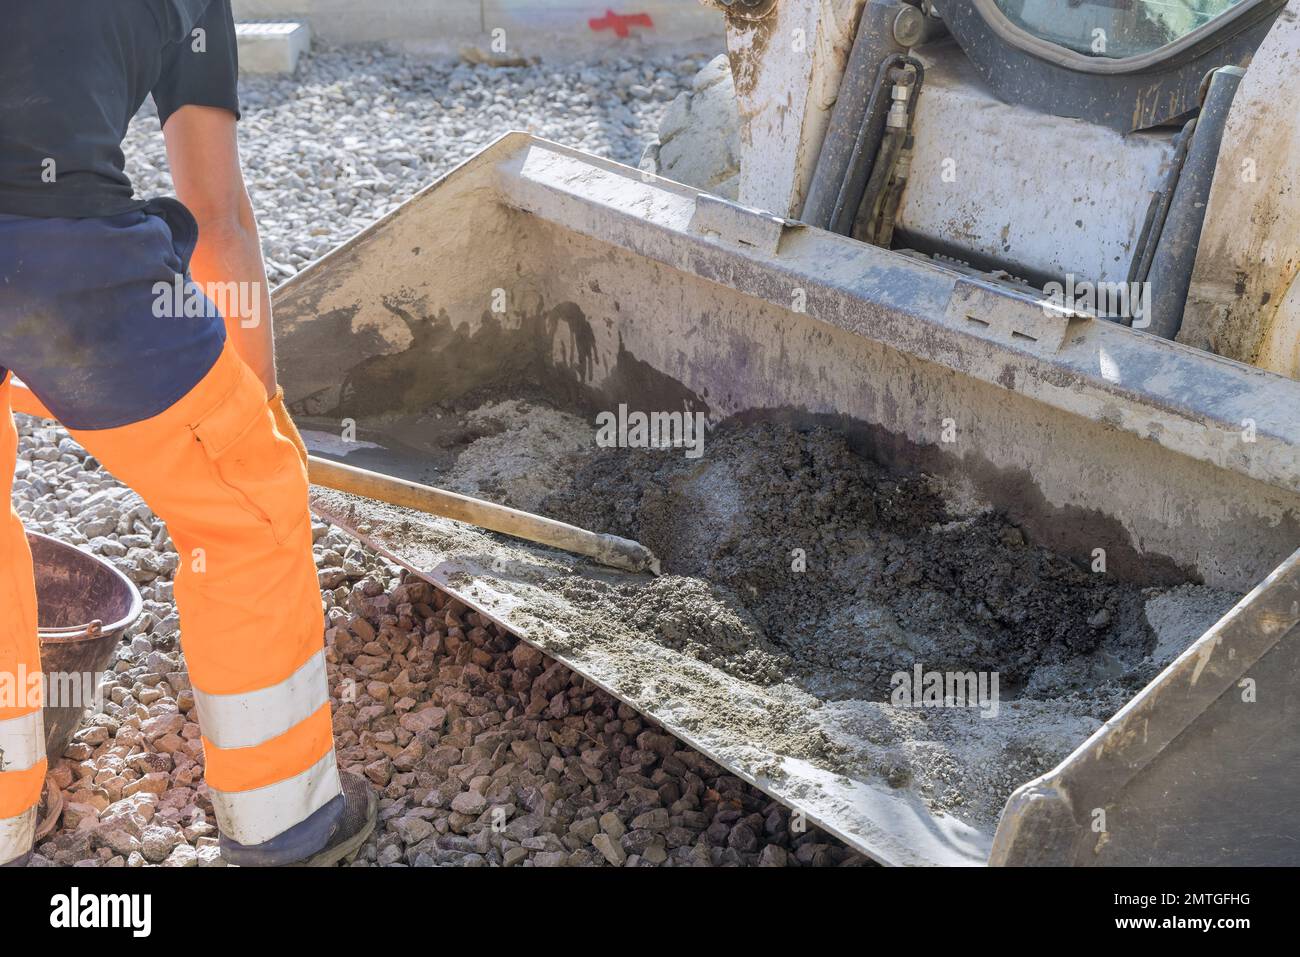 On construction site road workers knead cement mortar into buckets of an excavator Stock Photo